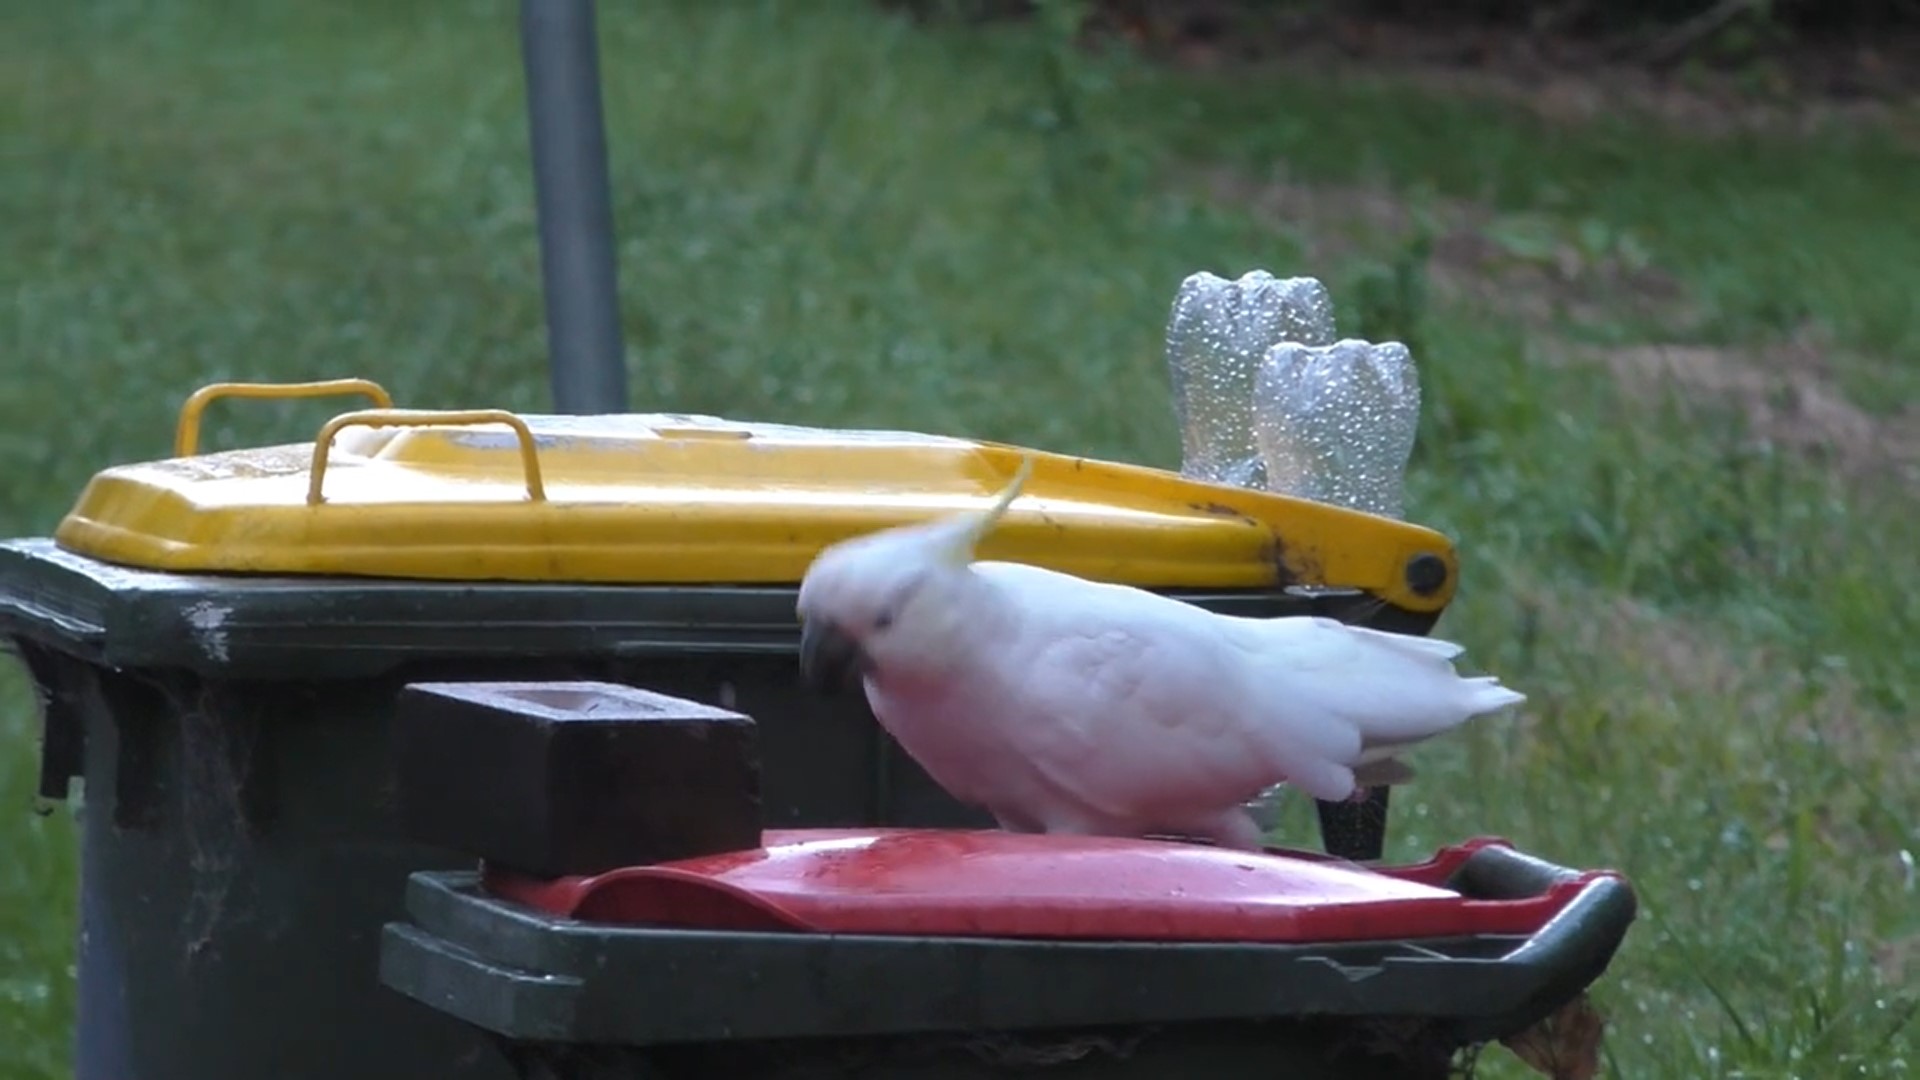 Sulphur-crested cockatoo successfully pushes off a brick to open the lid of a household waste bin